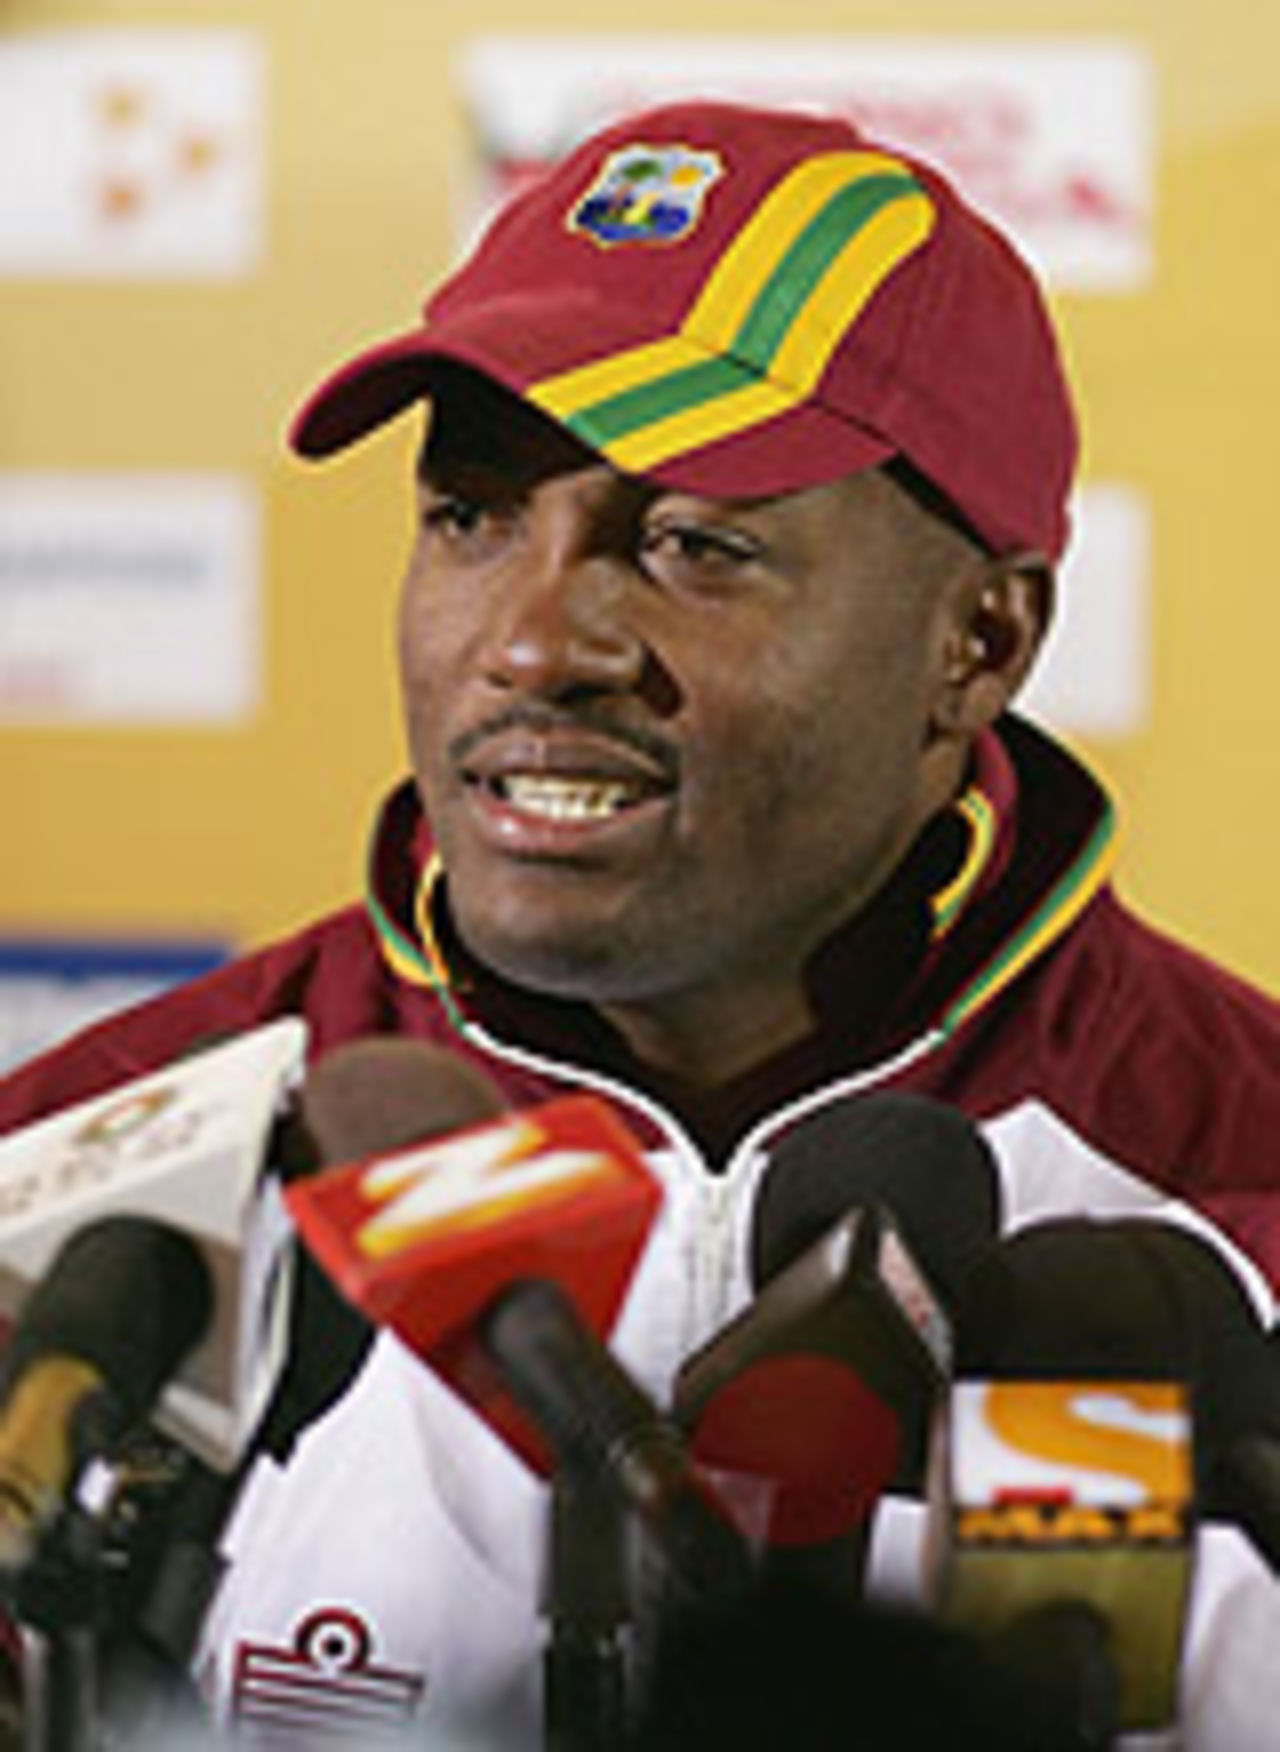 Brian Lara faces the press ahead of West Indies' appearance in the Champions Trophy final against England